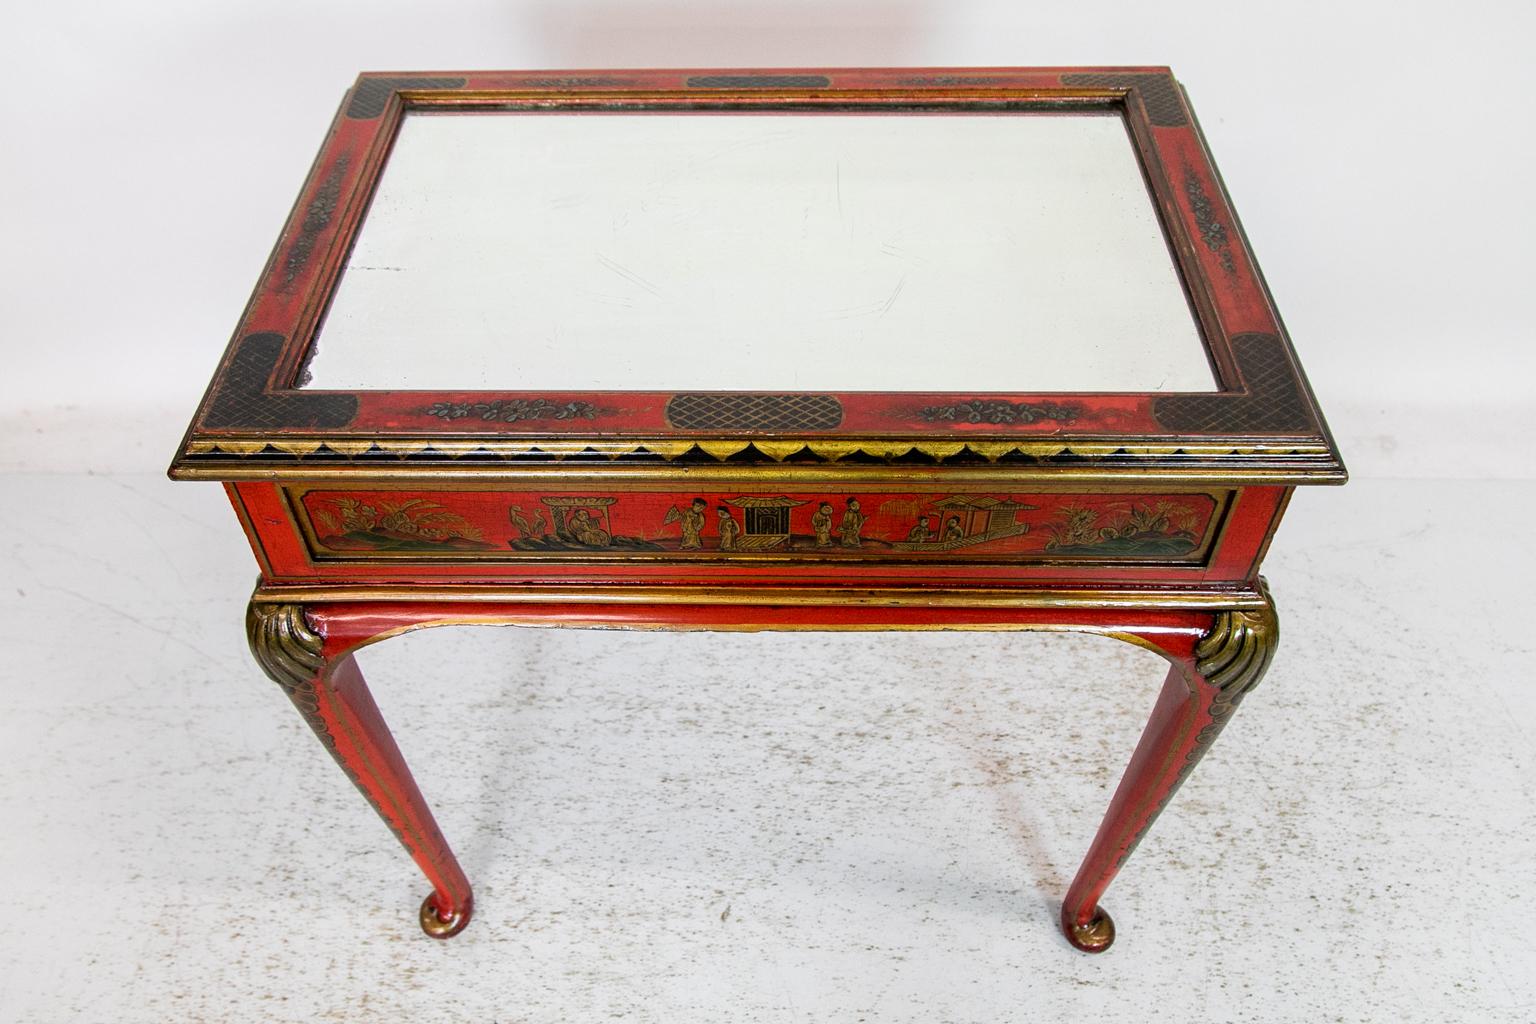 This English table is painted overall with chinoiserie decoration on a red background. The top has a mirrored center framed with gold and black floral and diapering motifs. The table is finished on all four sides, but the chinoiserie decoration is